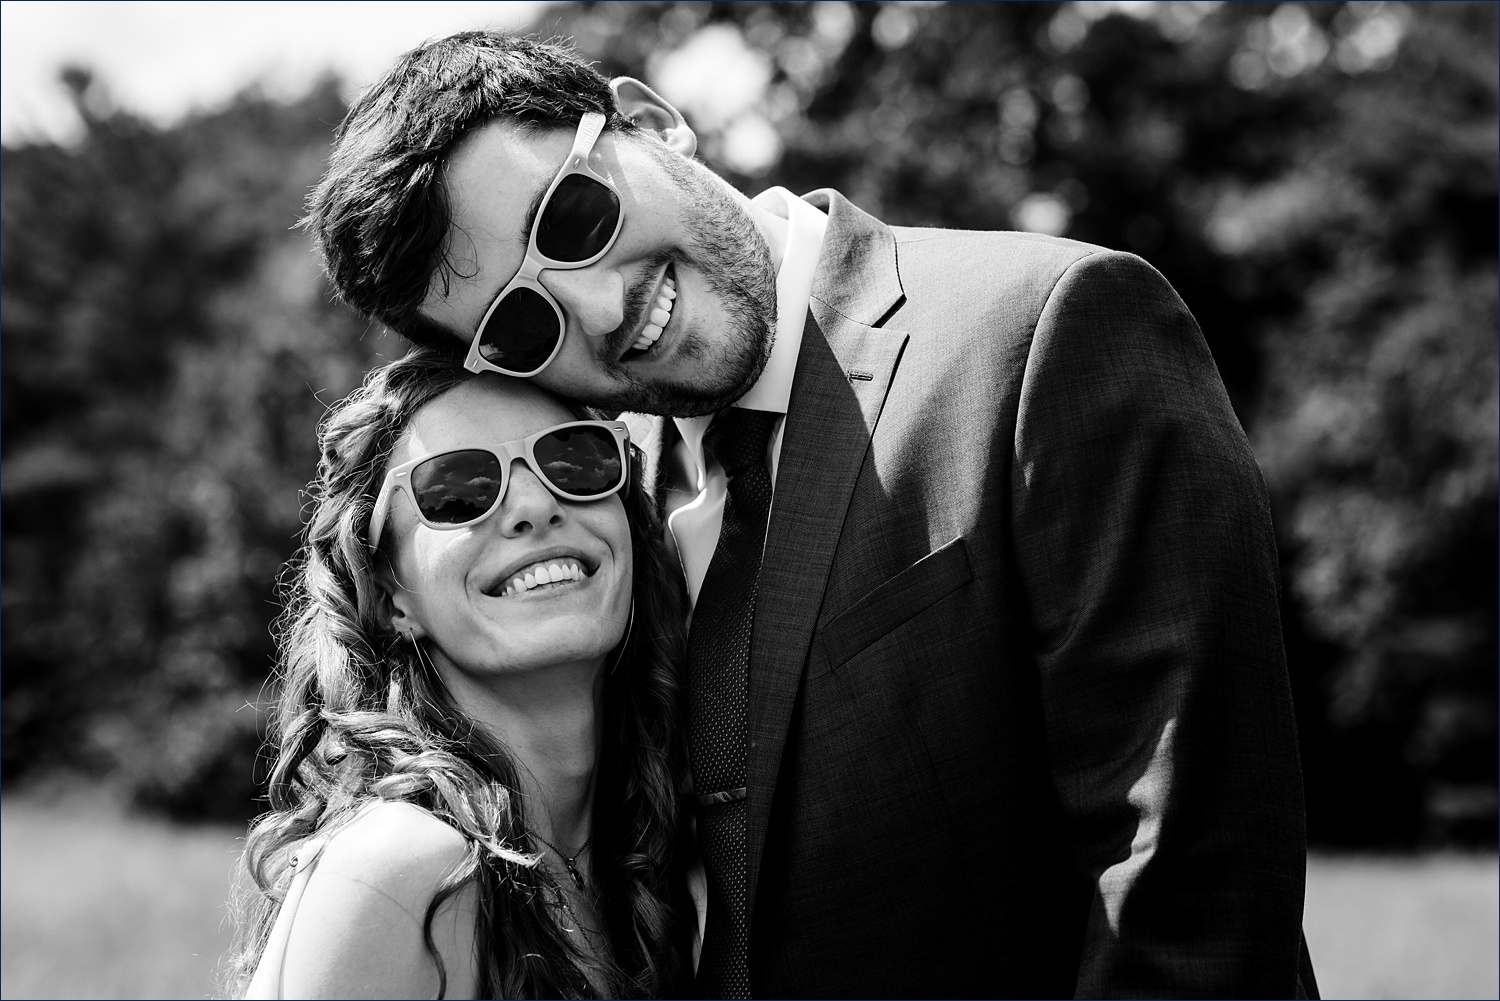 Sunglasses on the hot bright wedding day in Andover, MA for the couple